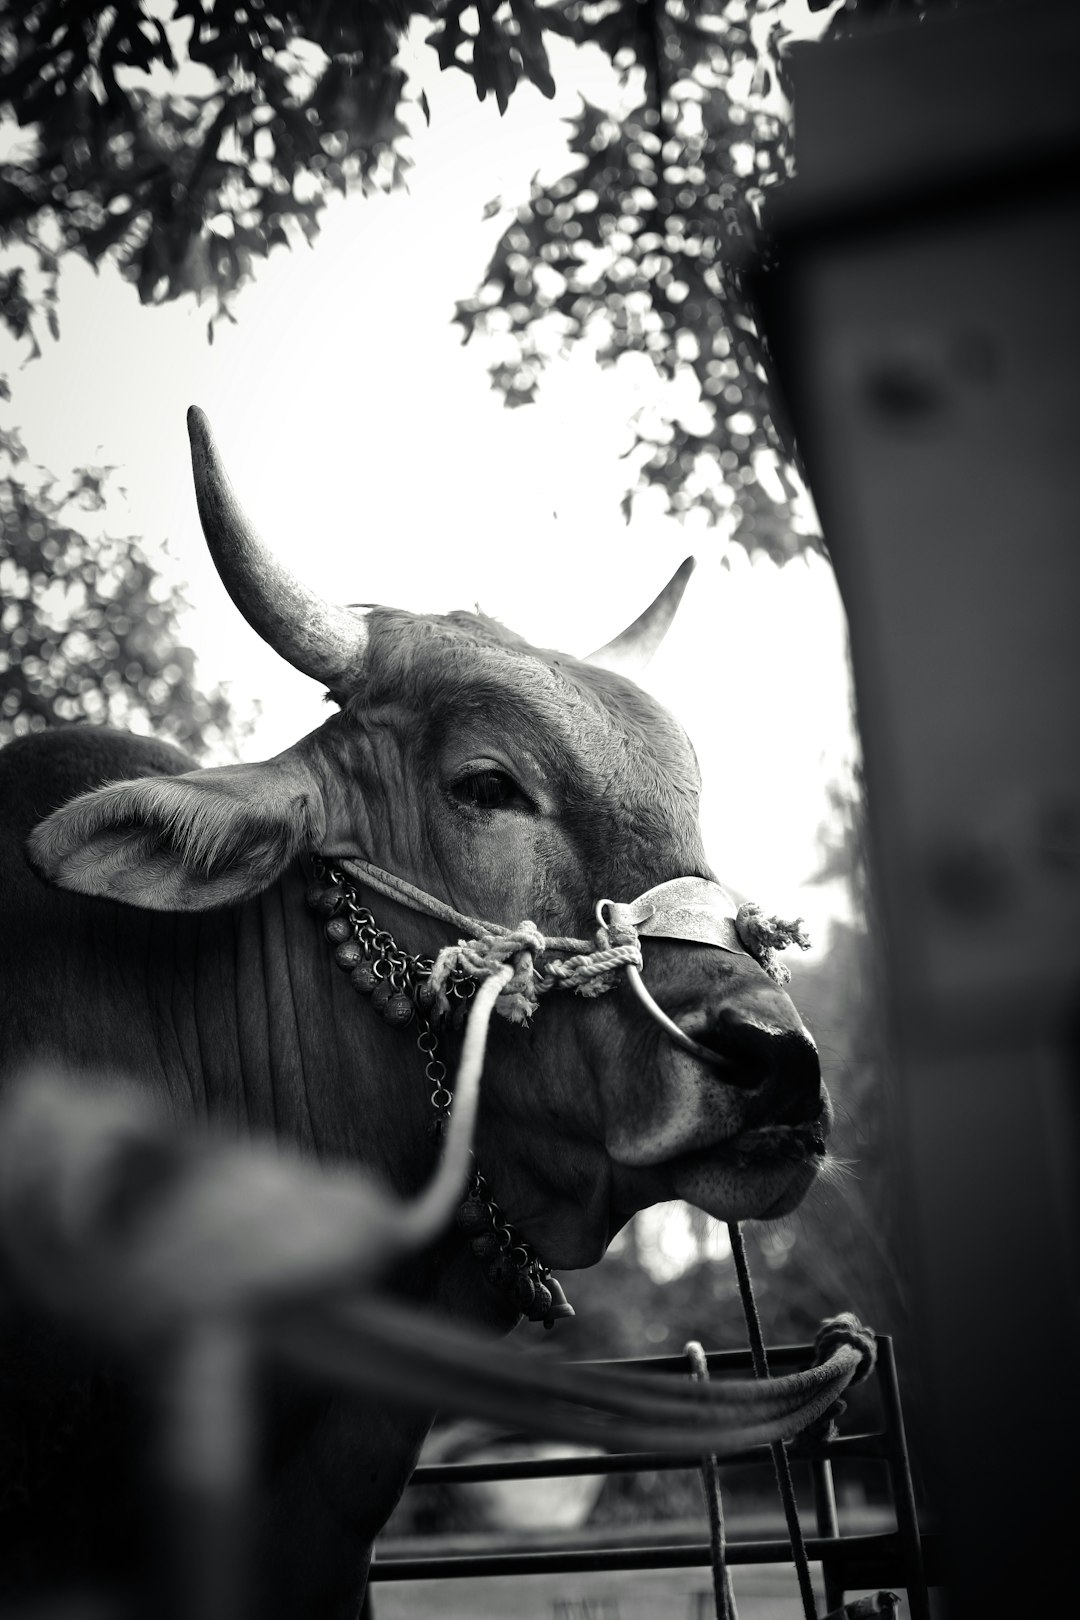 grayscale photo of cows head